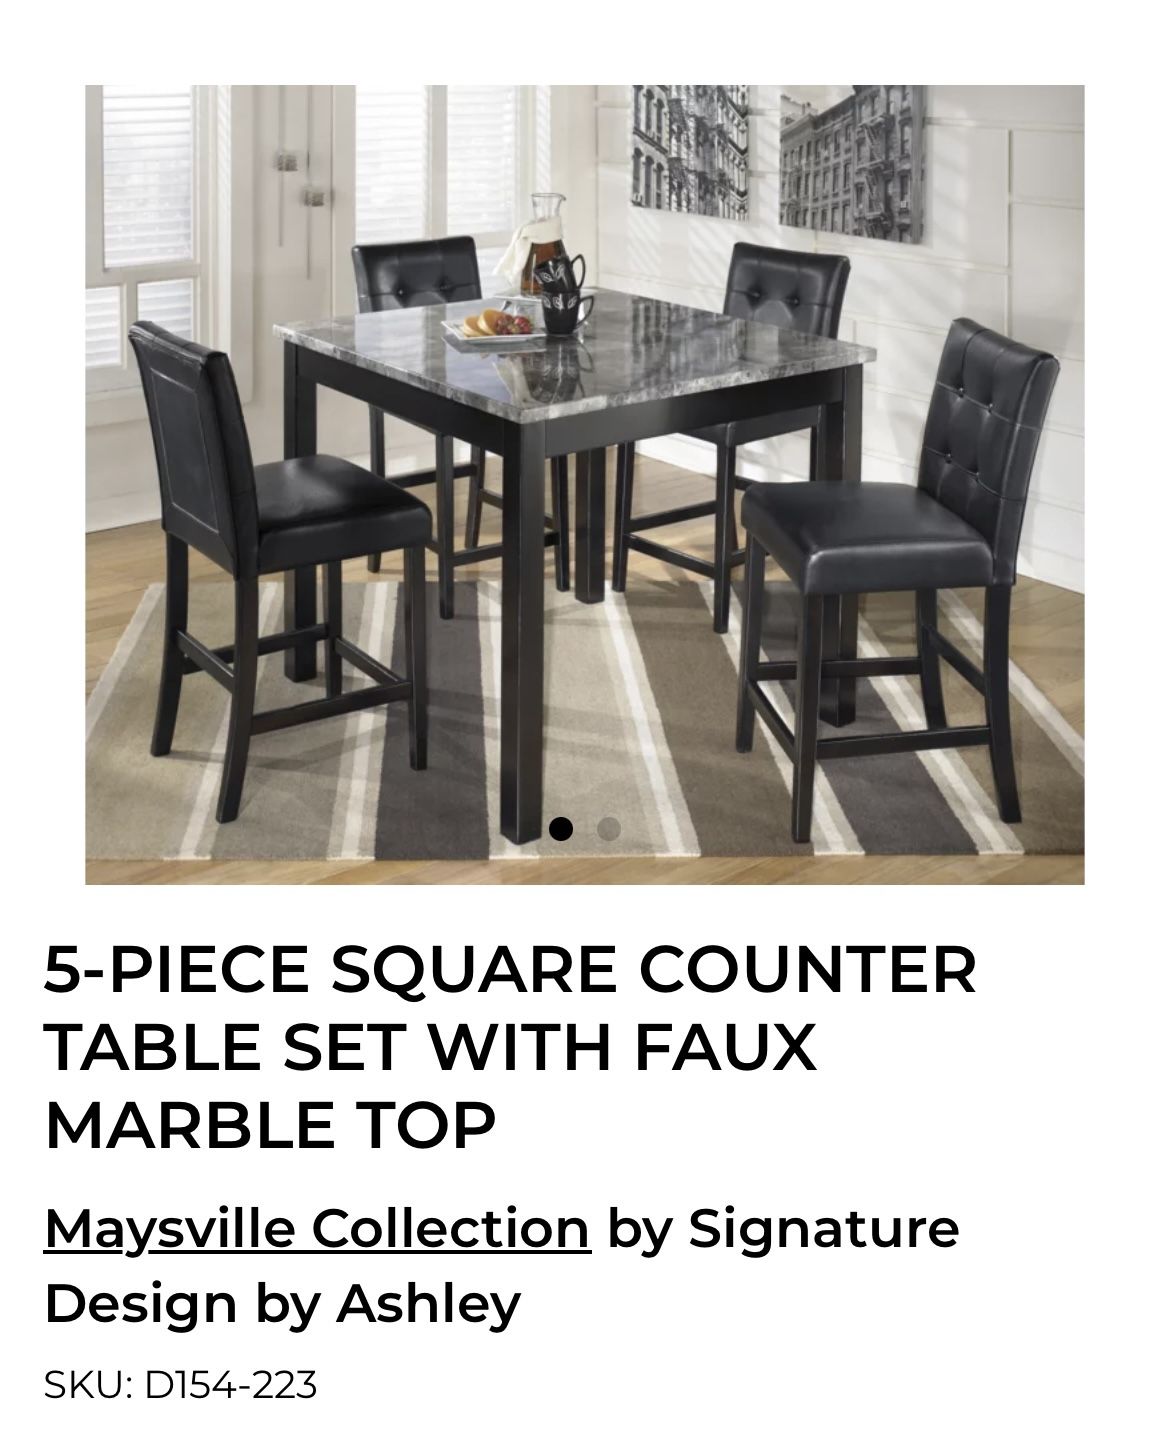 6 Piece Dining Table and Chairs